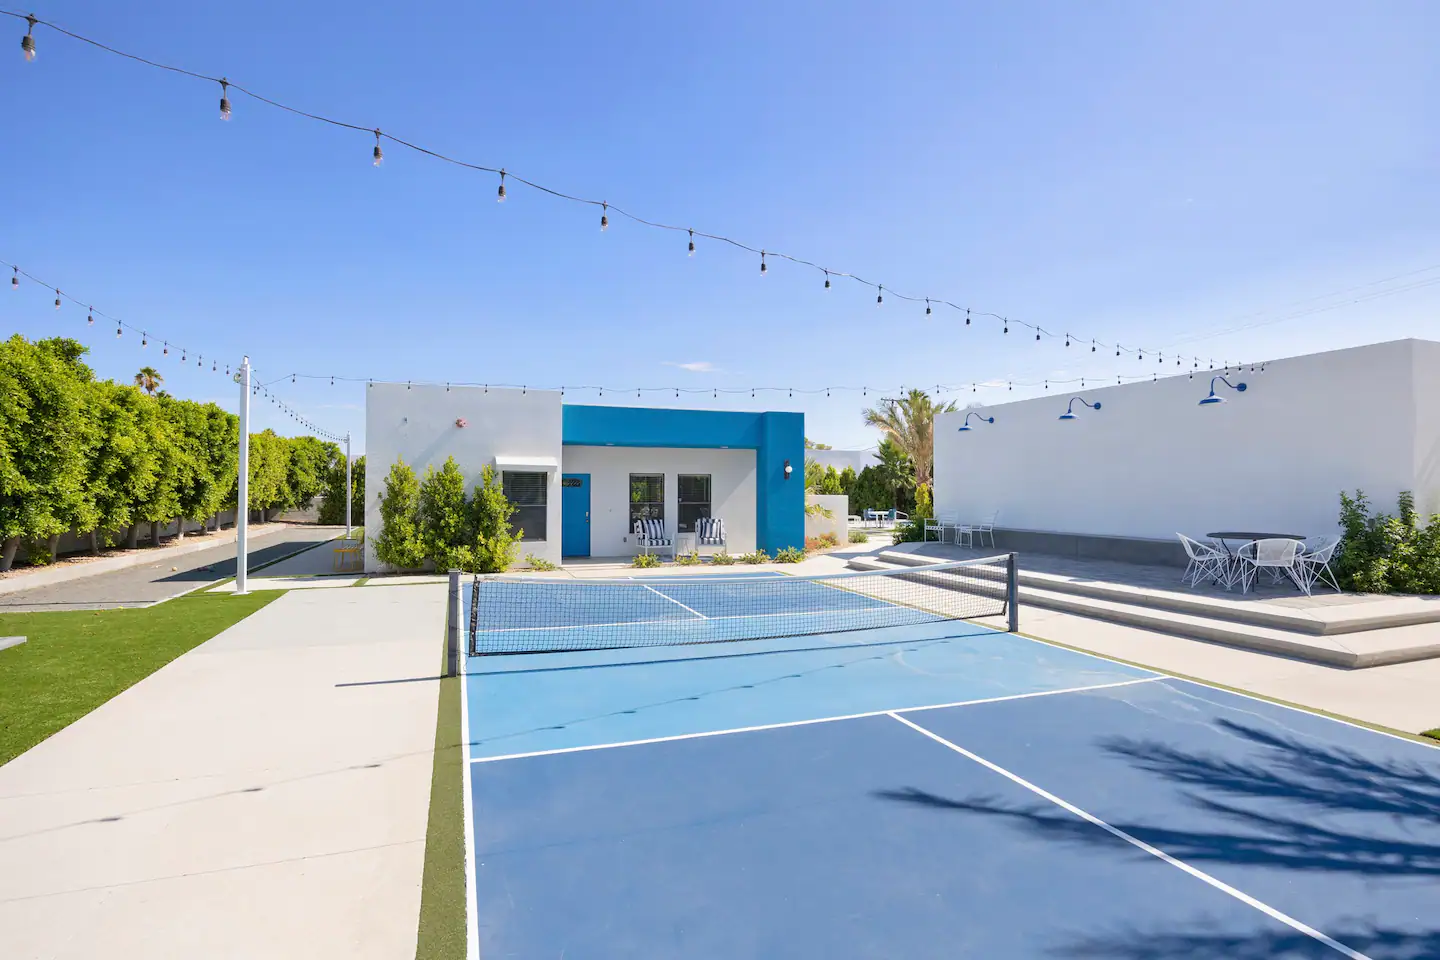 Best AirBnBs with Pickleball Courts in California